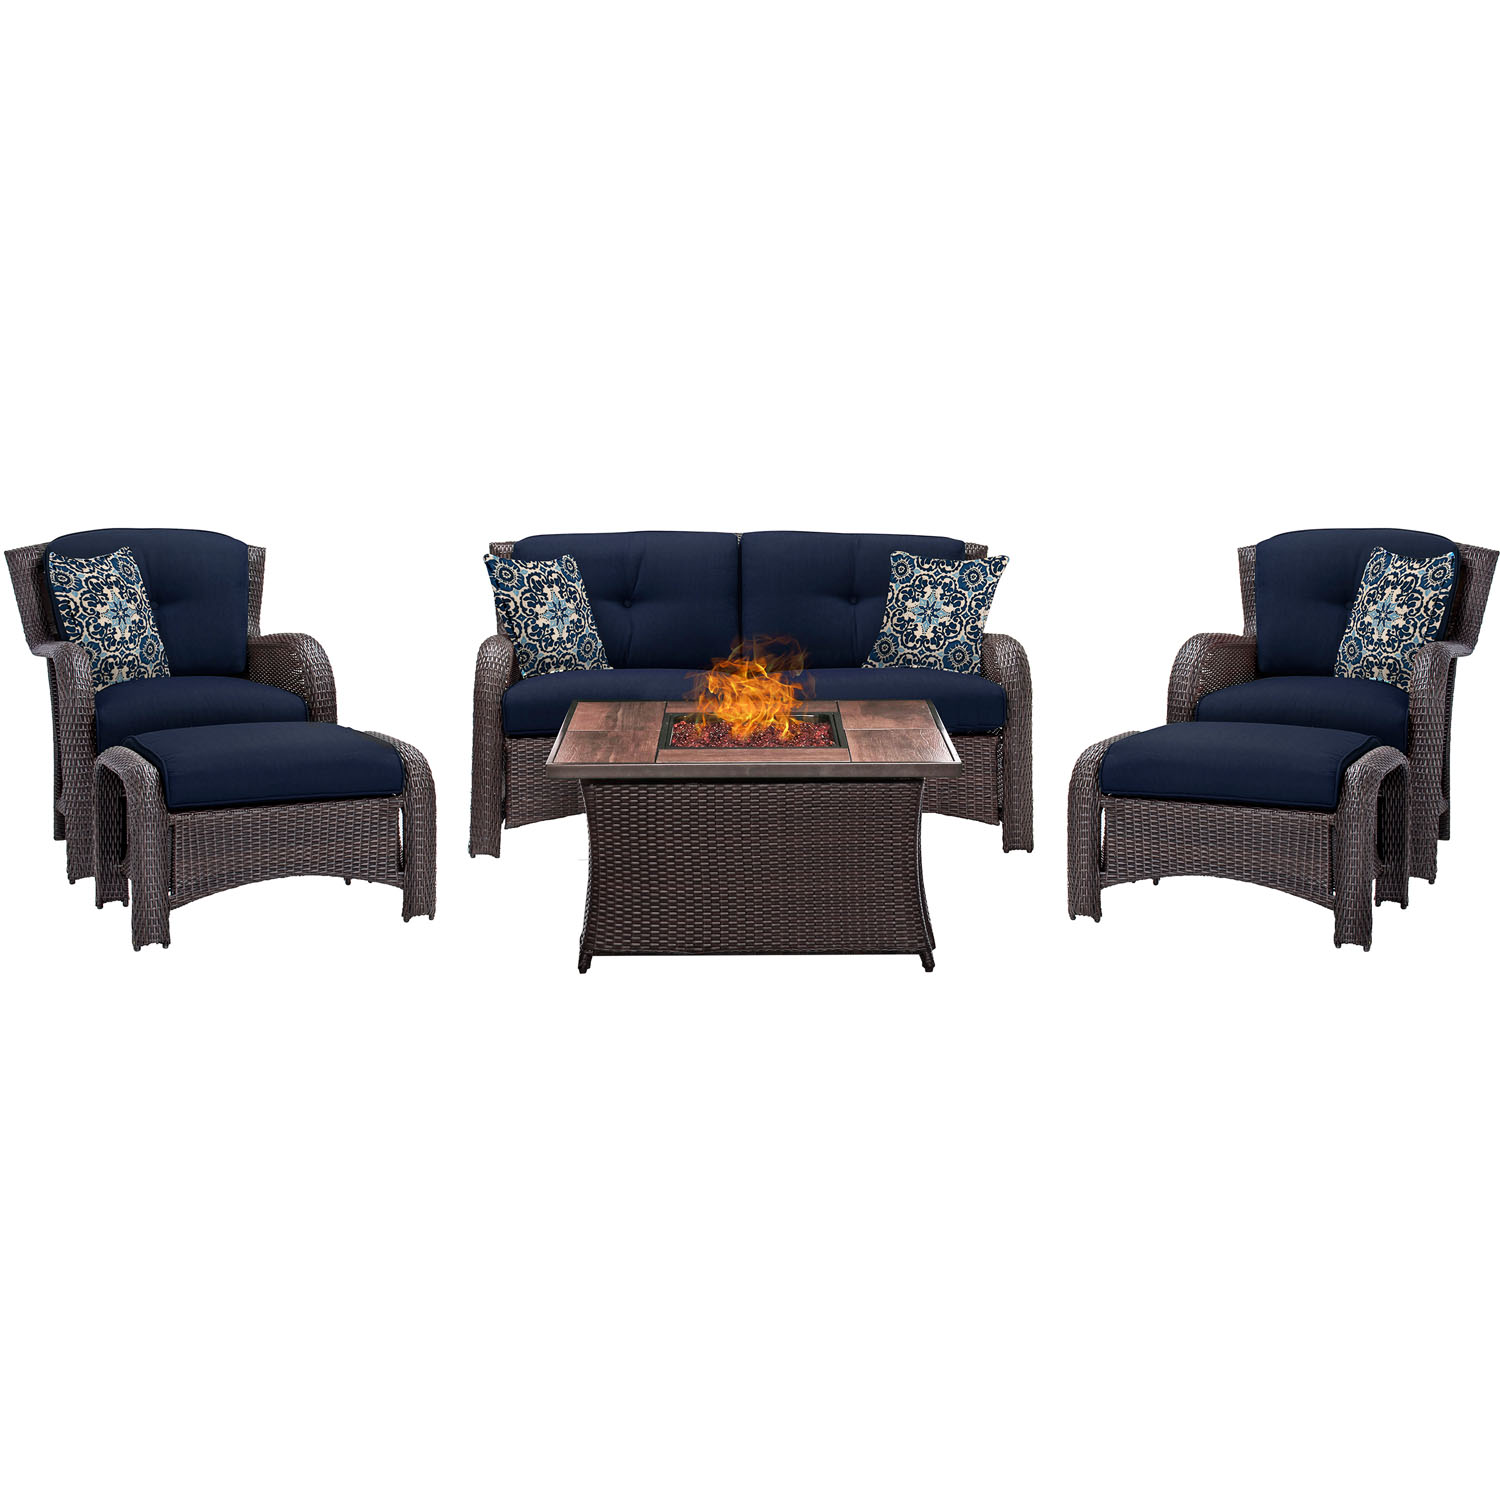 Hanover Strathmere 6-Piece Hand-Woven Wicker Chat Set with Fire Pit Table | Luxury Outdoor Furniture | UV Protected Cushions | Rust and Weather Resistant Frame | Navy | STRATH6PCFP-NVY-WG - image 1 of 12